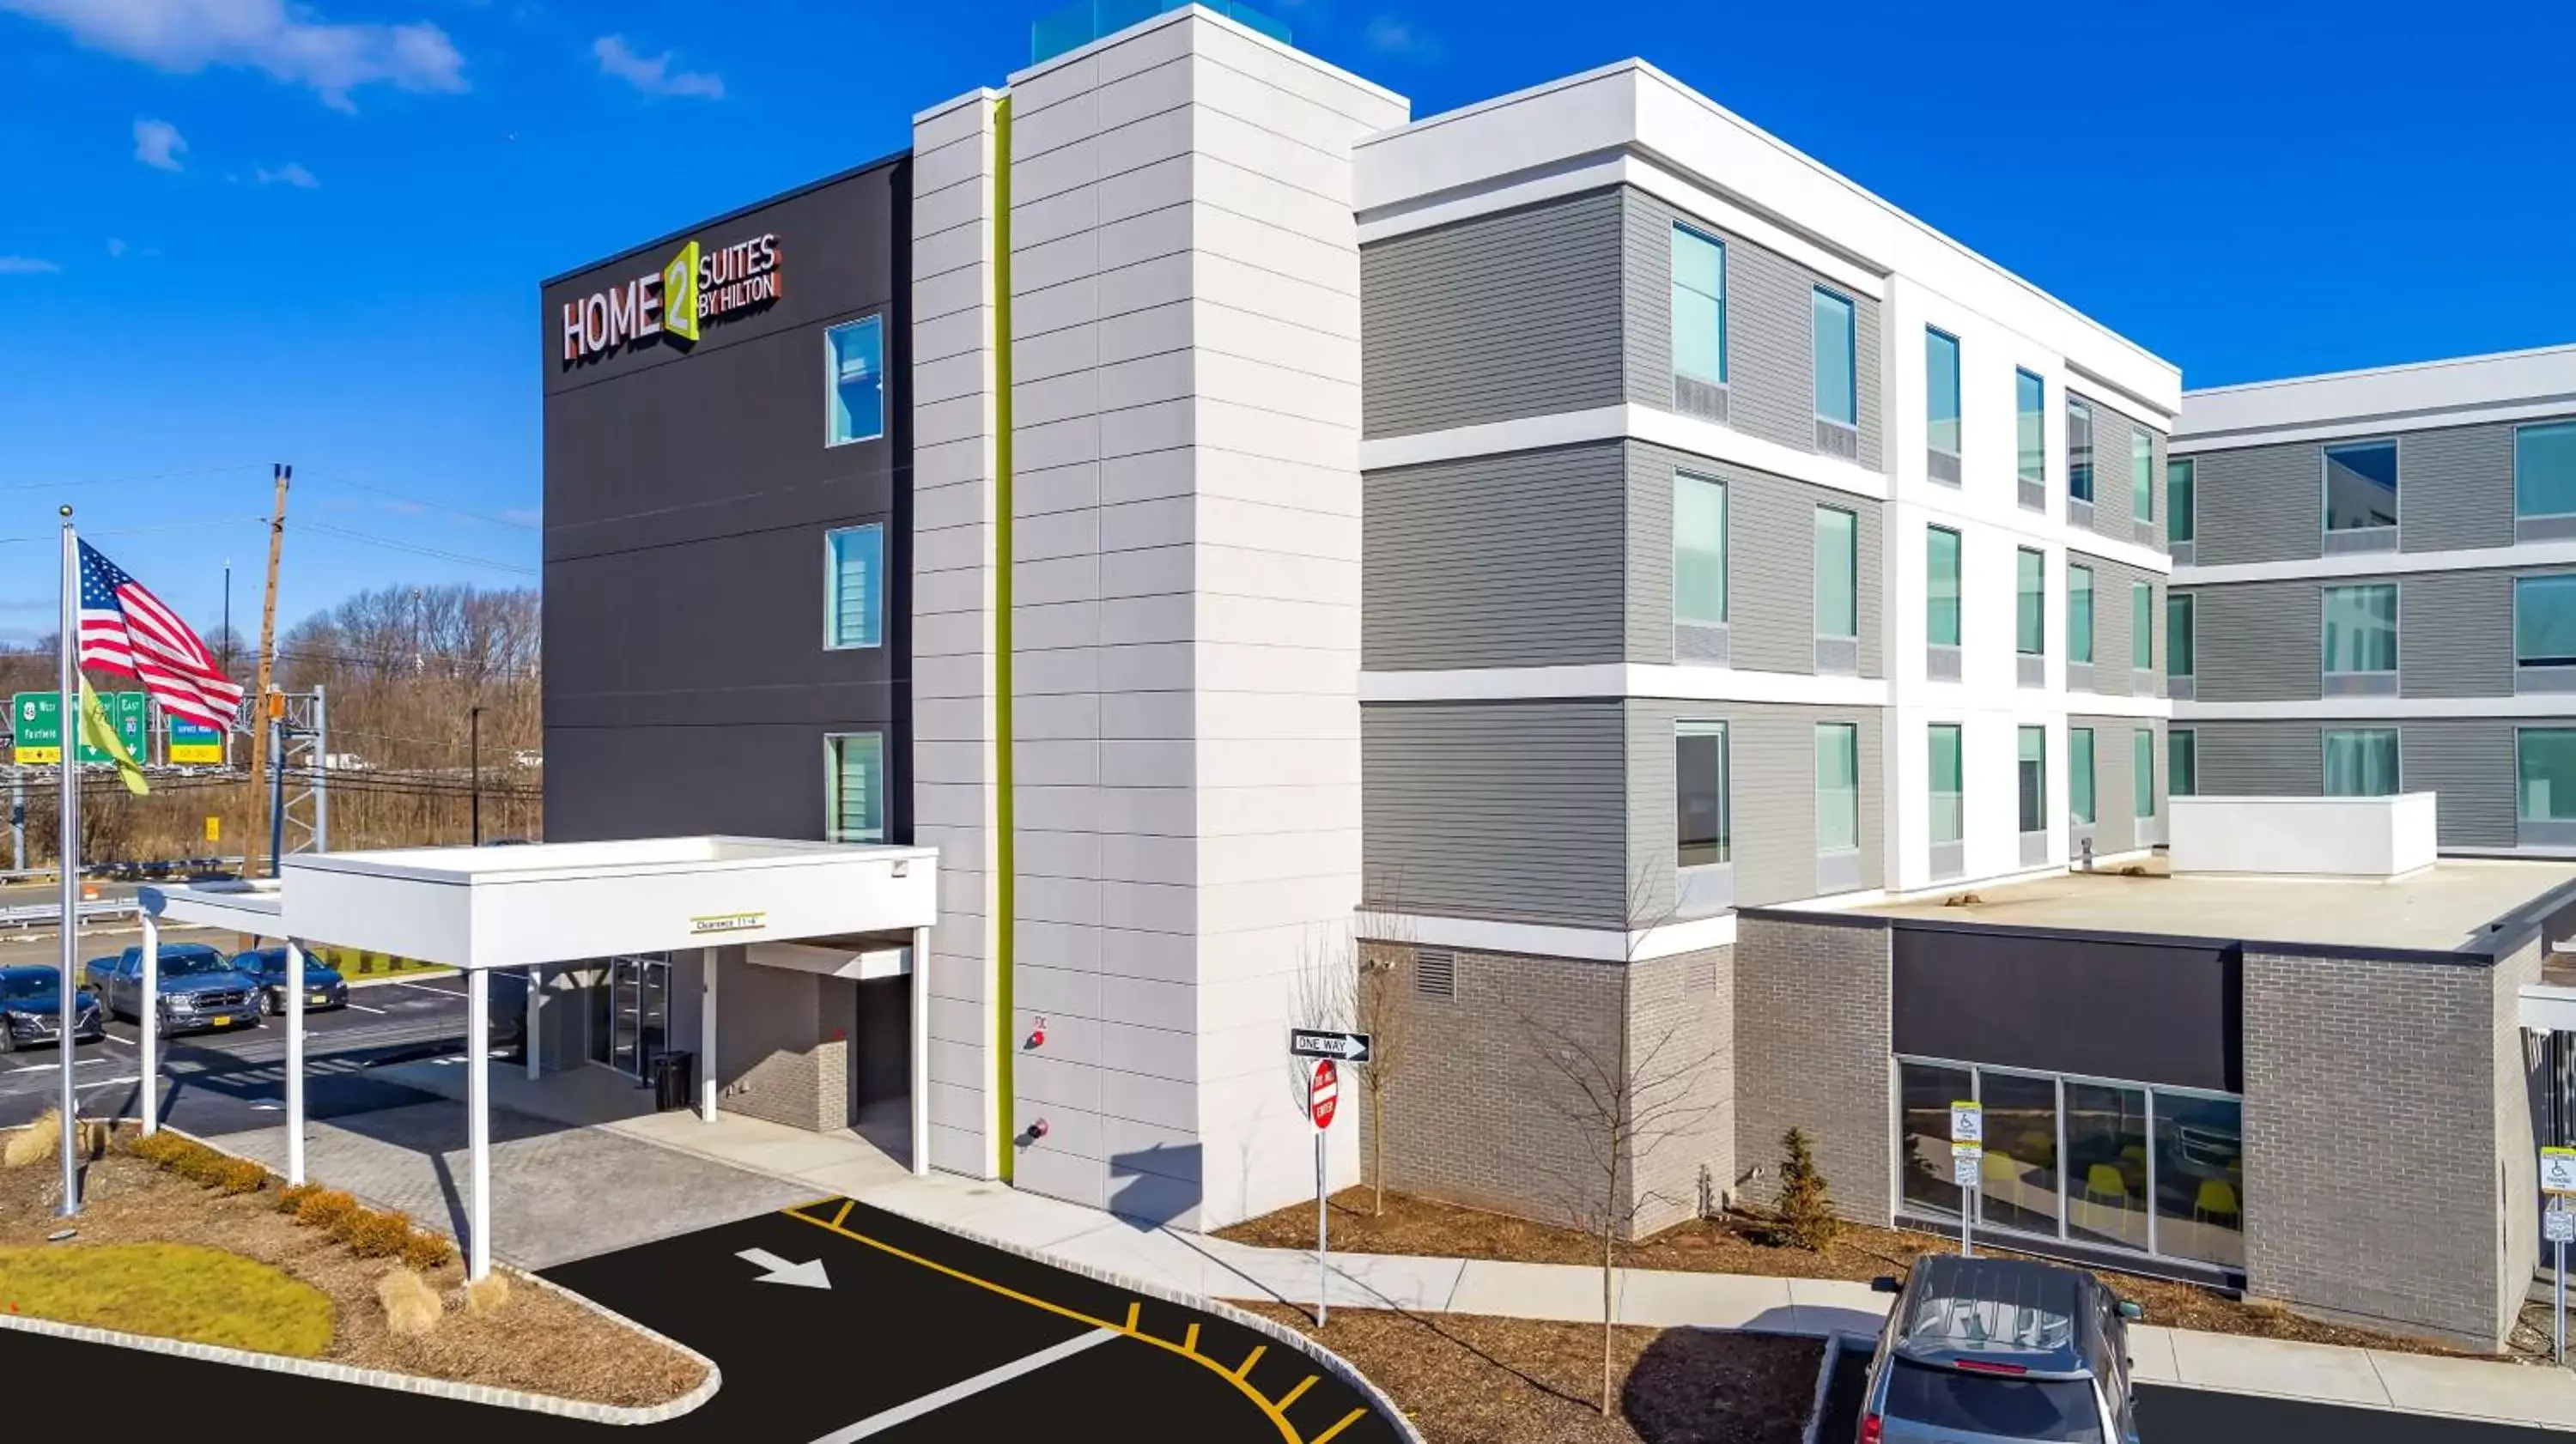 Property Building in Home2 Suites By Hilton Wayne, NJ